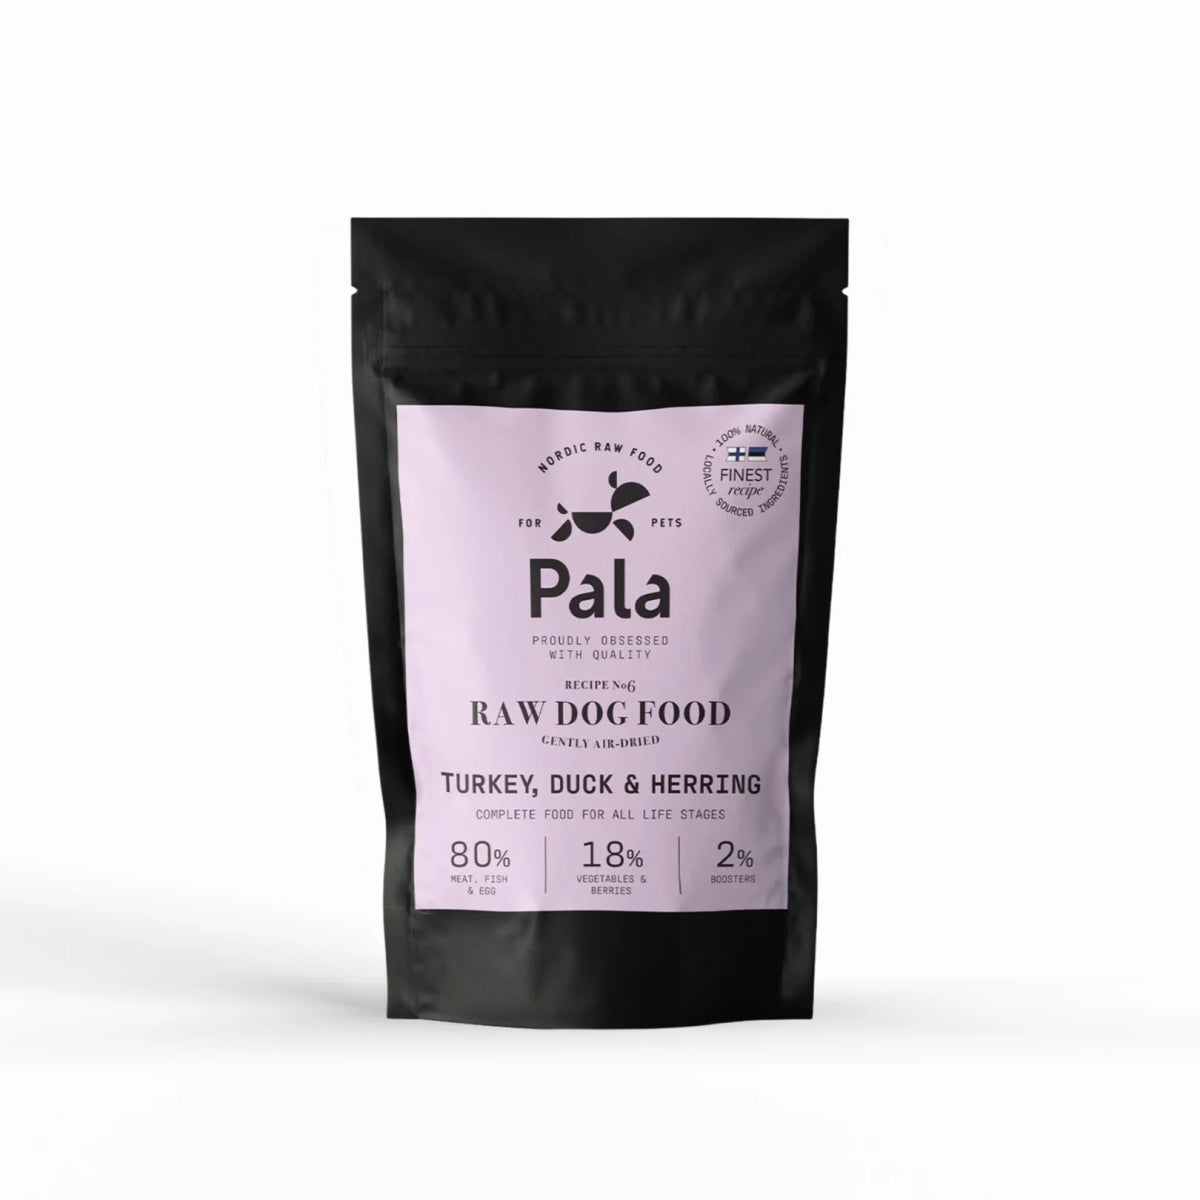 PALA RAW DOG FOOD, Turkey, Duck & Herring, 100% Natural Air-Dried Complete Food for Dogs - Okidogi.store